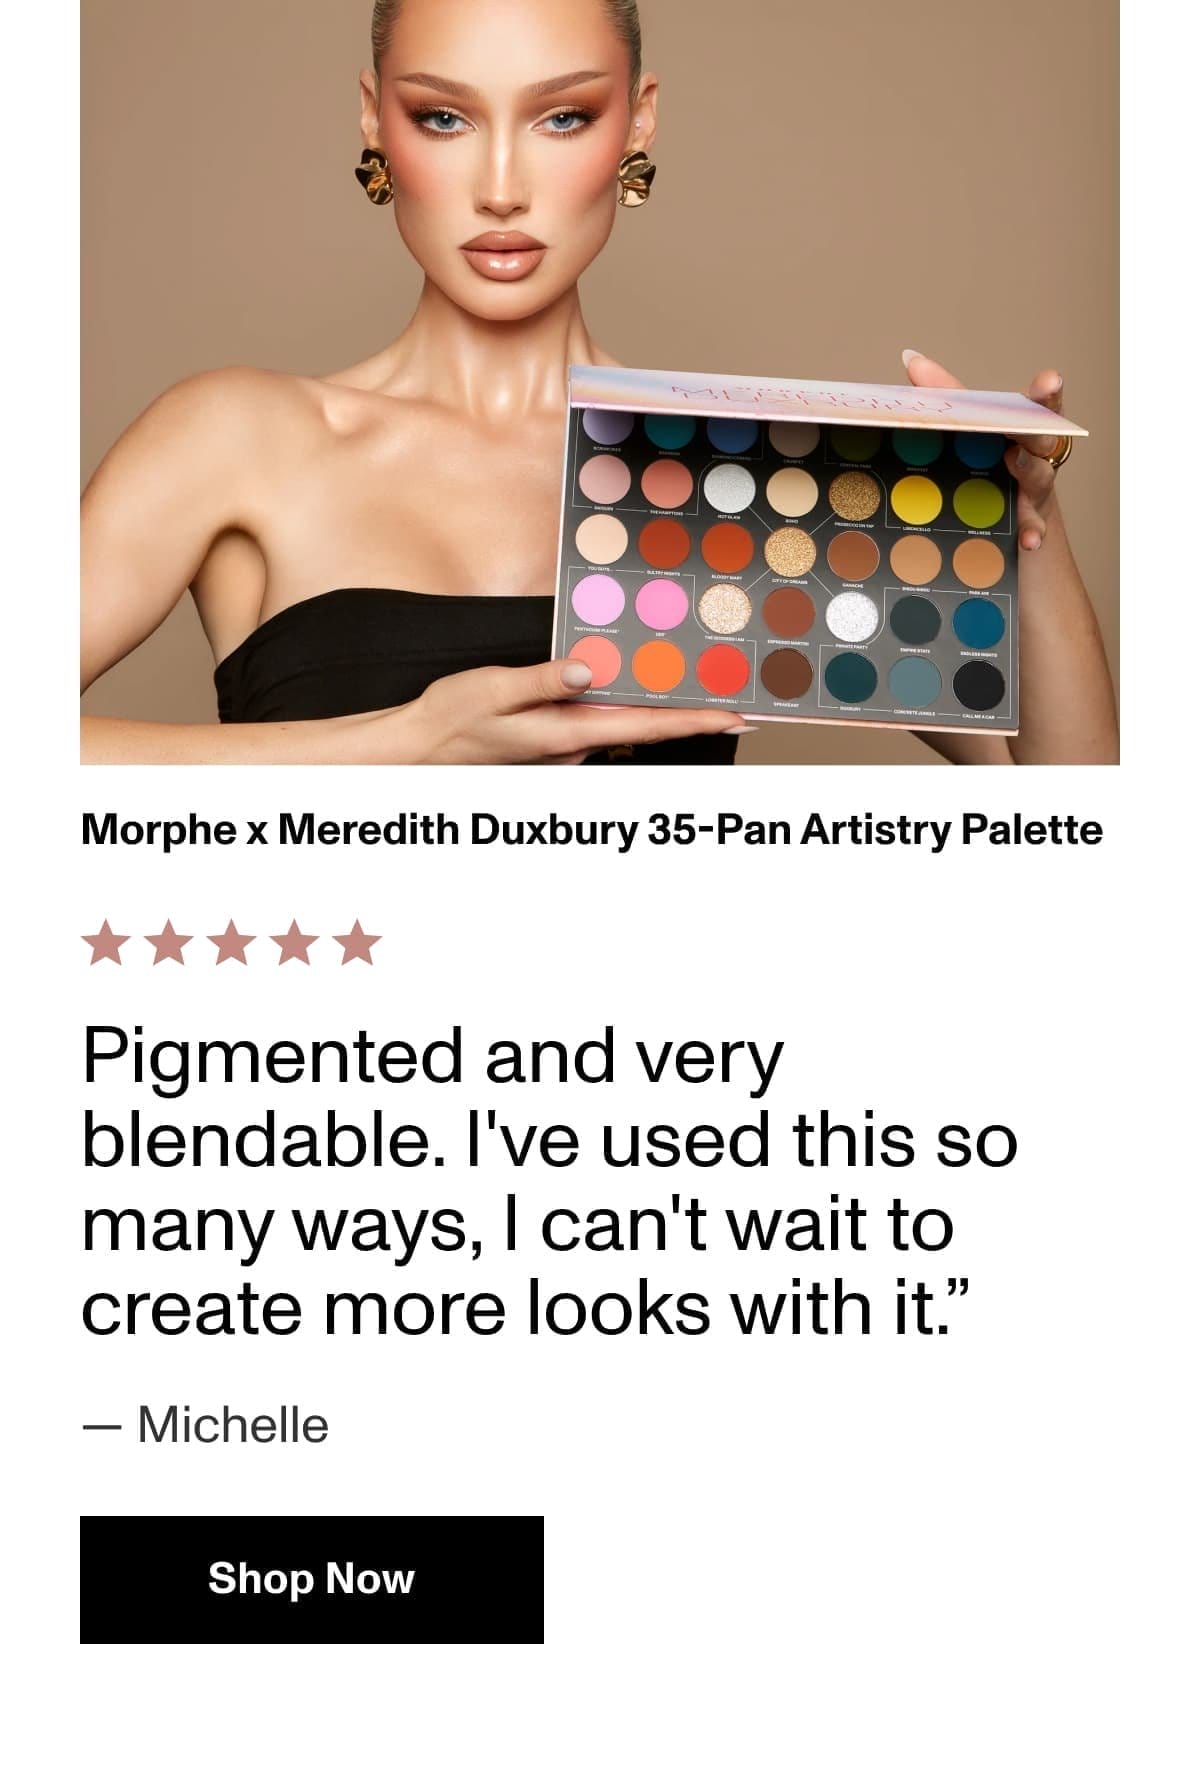 They know it, you know it. | Morphe x Meredith Duxbury 35-Pan Artistry Palette | Pigmented and very blendable. I've used this so many ways, I can't wait to create more looks with it.” — Michelle | Shop Now